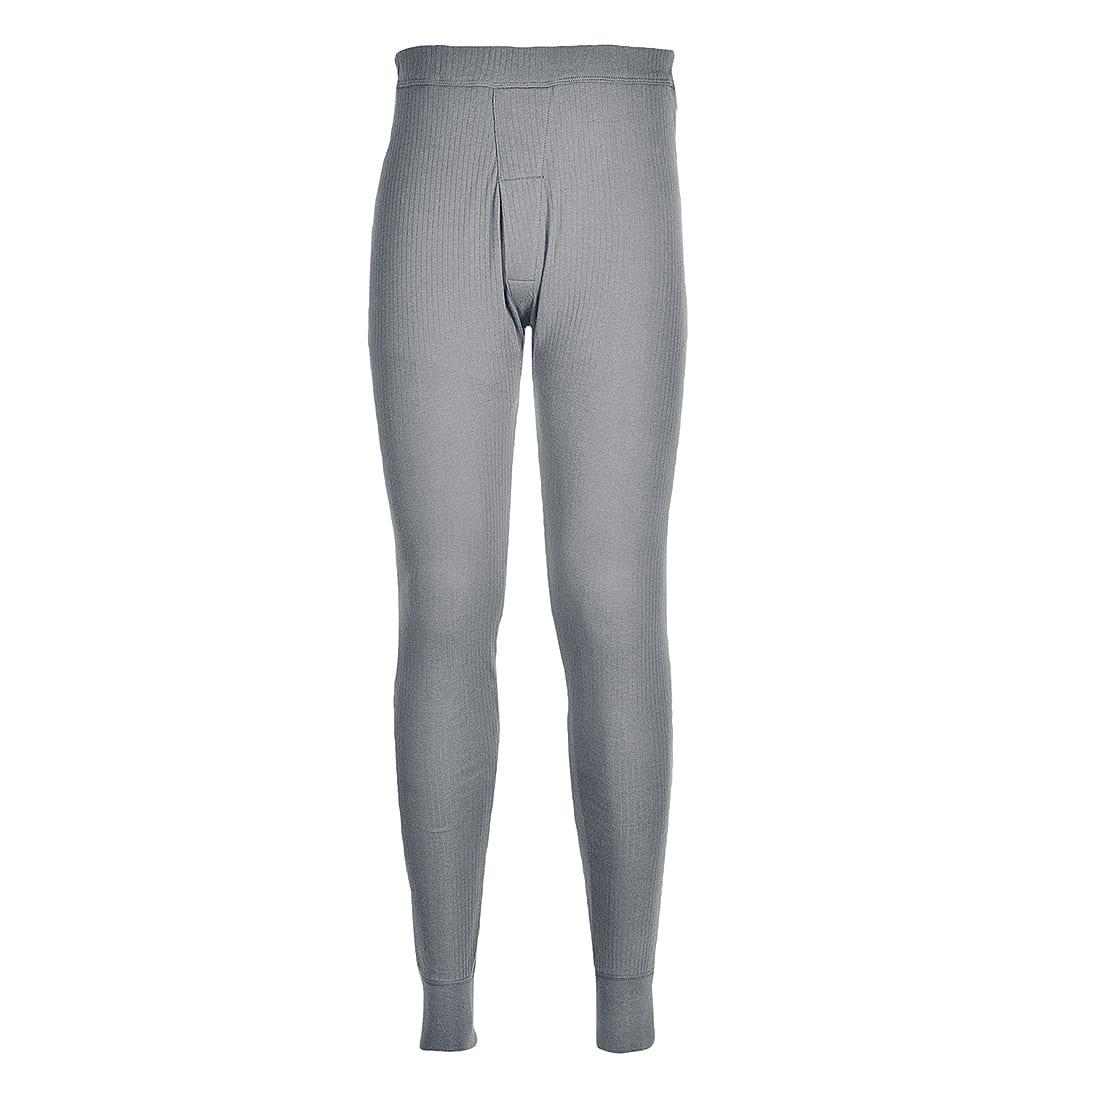 Portwest Thermal Trousers in Grey (Product Code: B121)